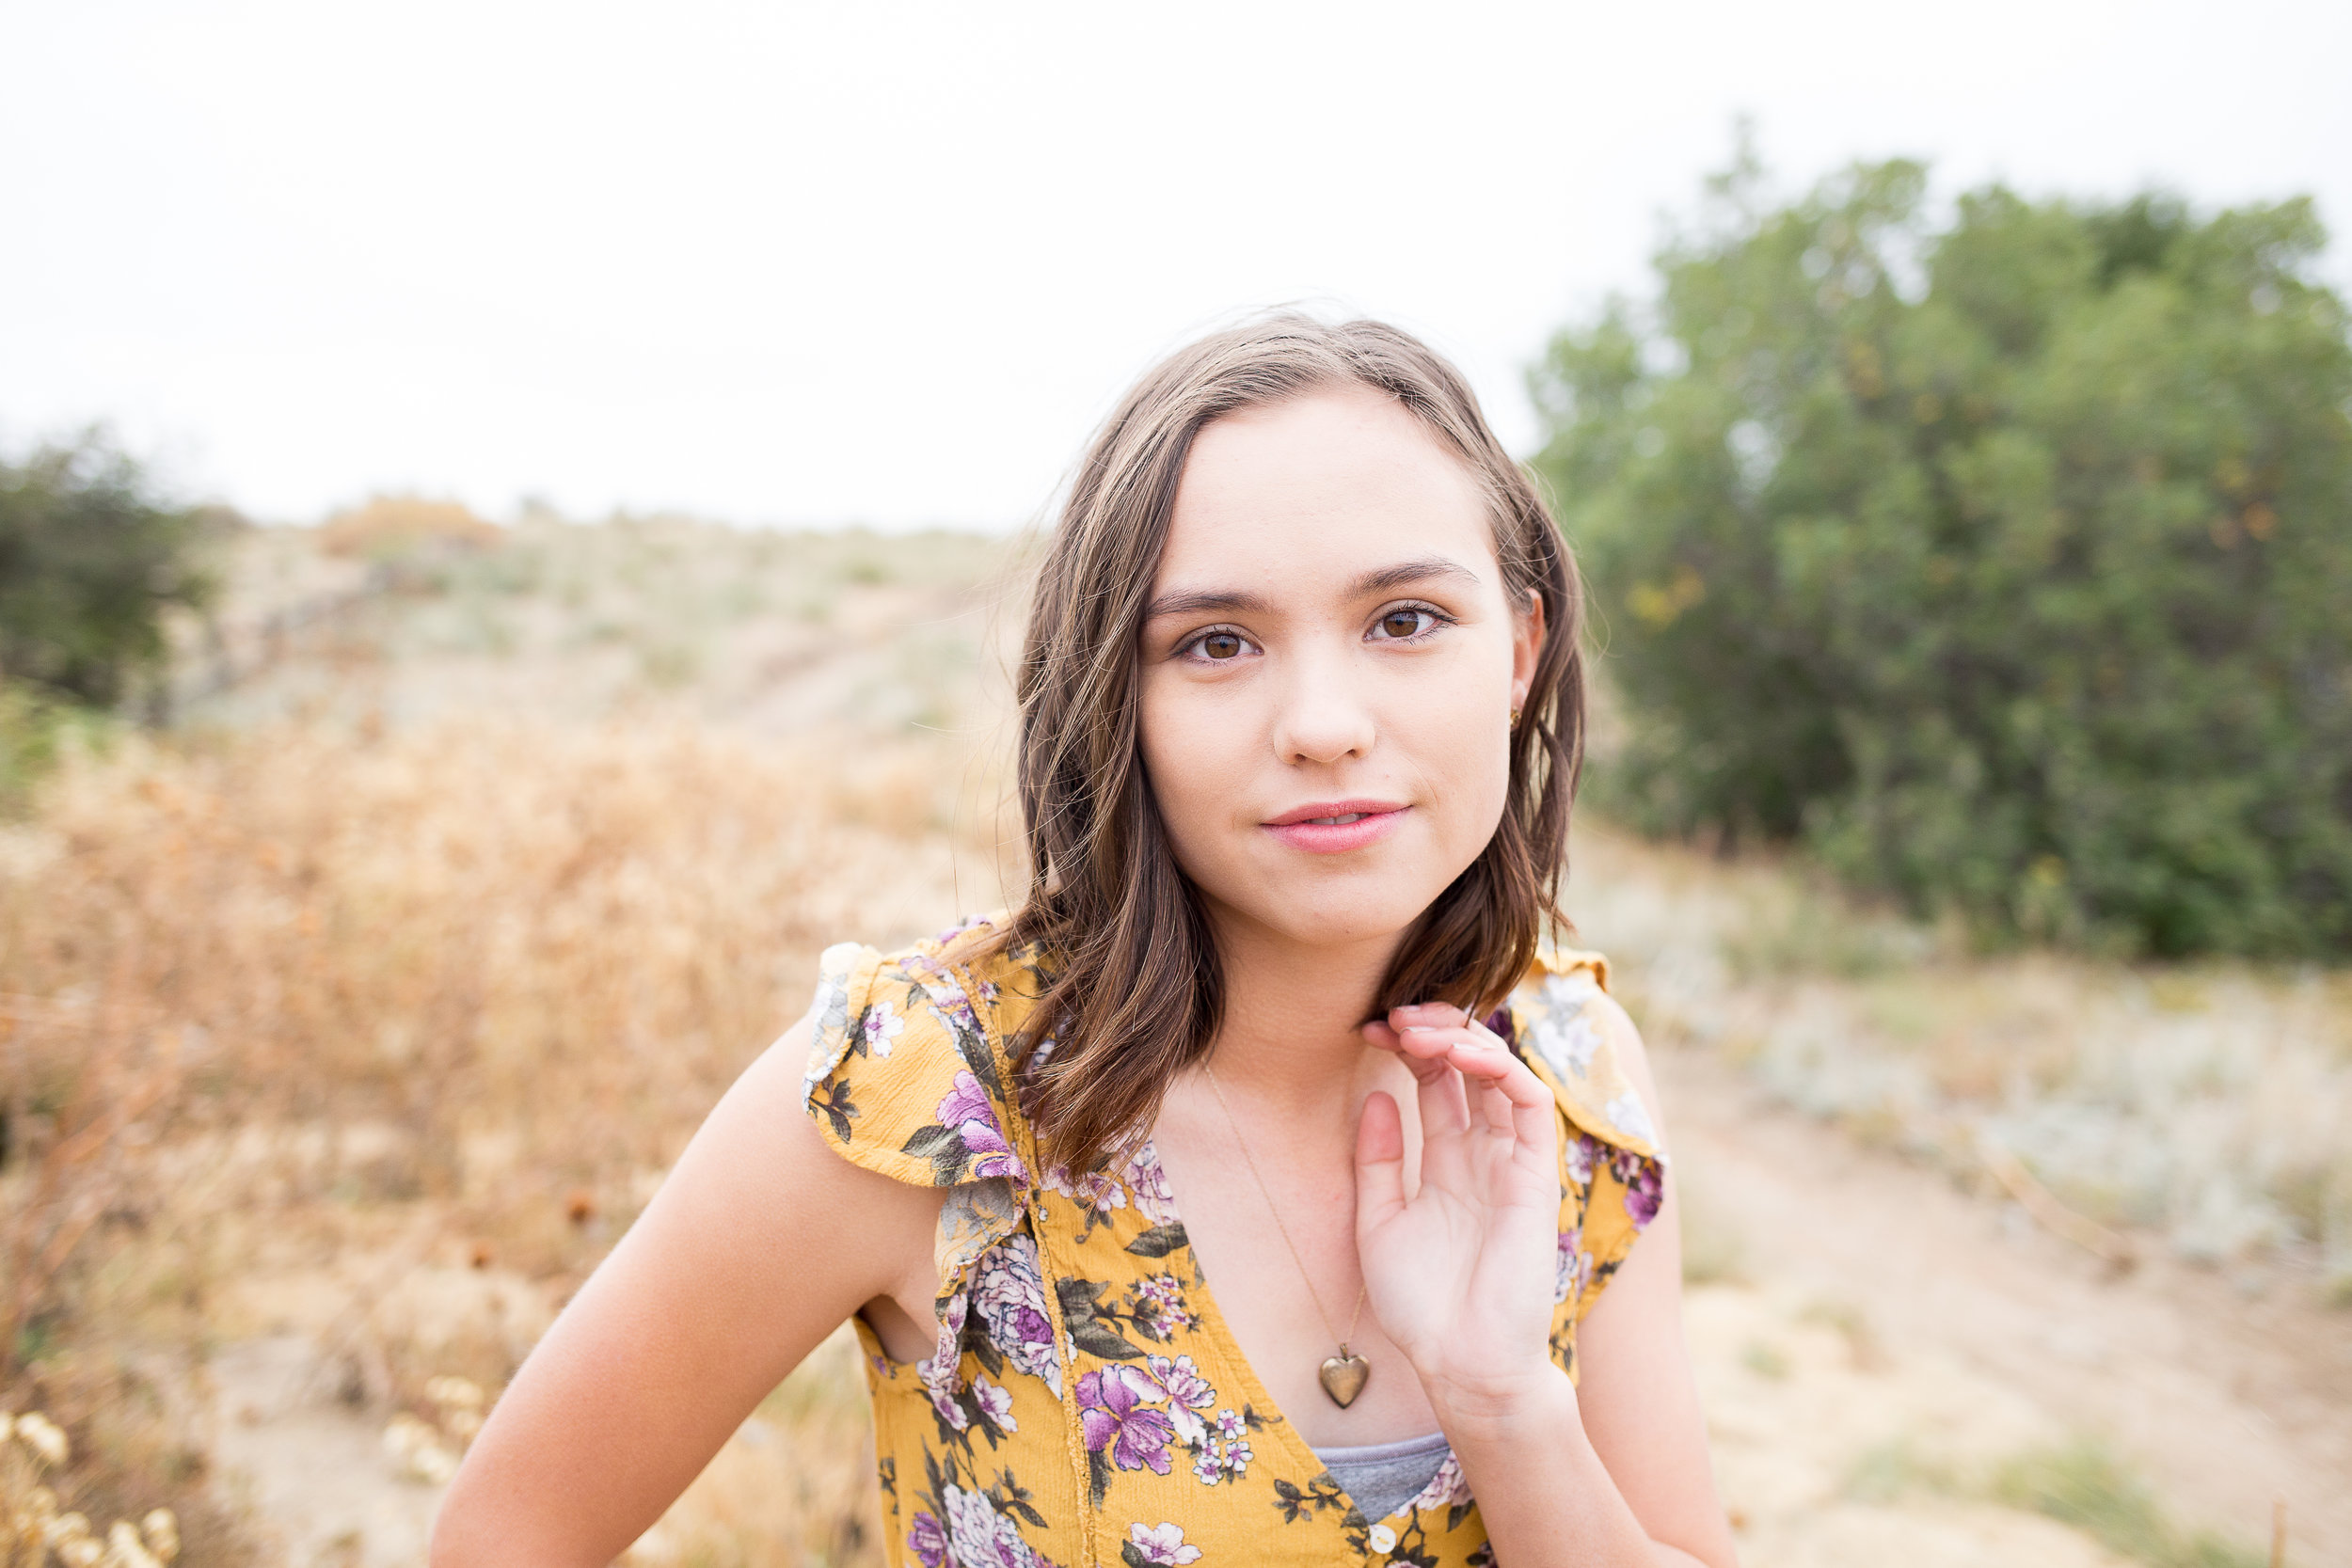 Colorado Springs Senior Photography | Doherty High School | Stacy Carosa Photography | Senior girl smiling at camera surrounded by tall grasses in the fall